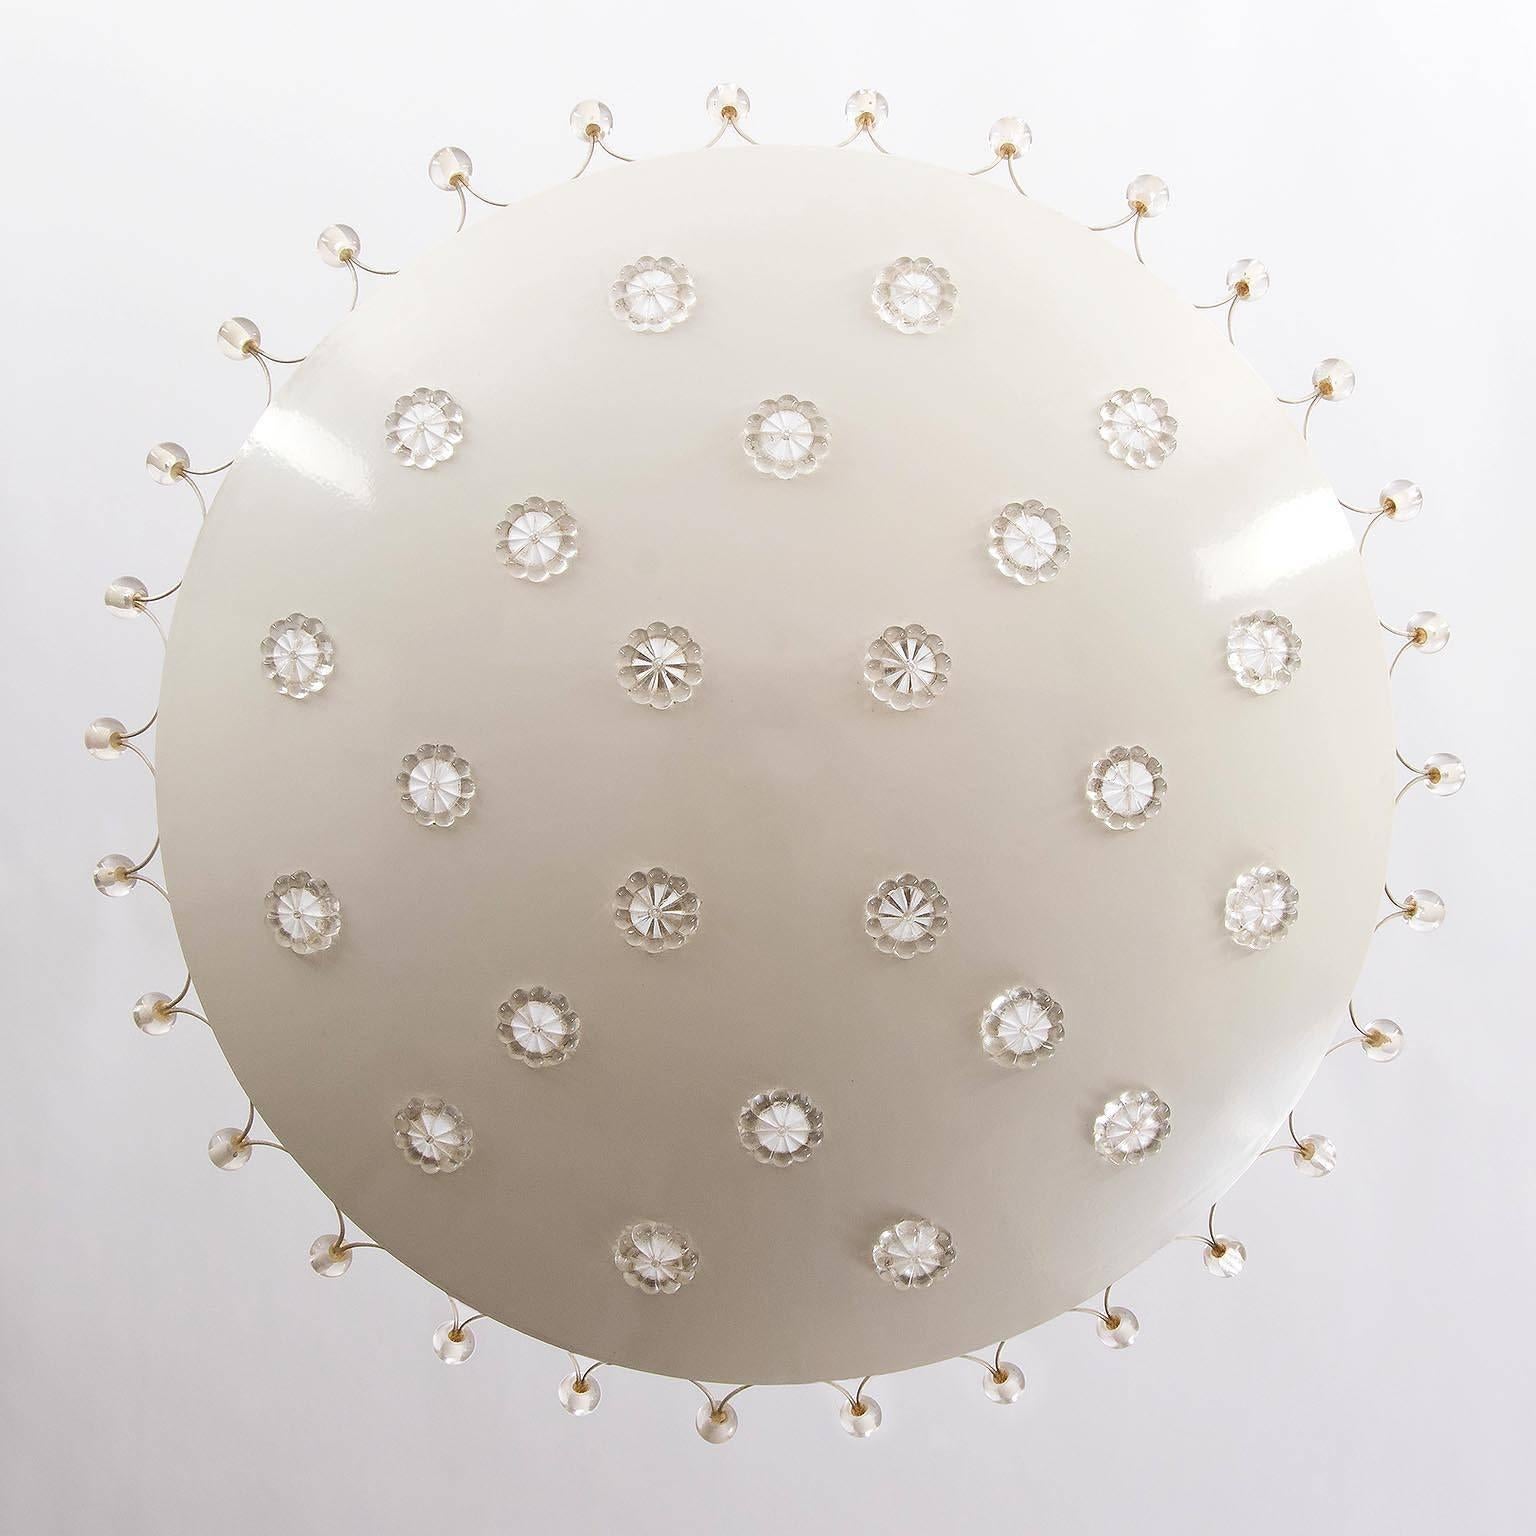 Beautiful ceiling uplight lamp by L.A. Riedinger of Augsburg, Germany. It made of a white enameled dome-shaped metal base with glass blossoms and round glass pearls. This is the larger version with four medium base bulbs.

The length of the stem